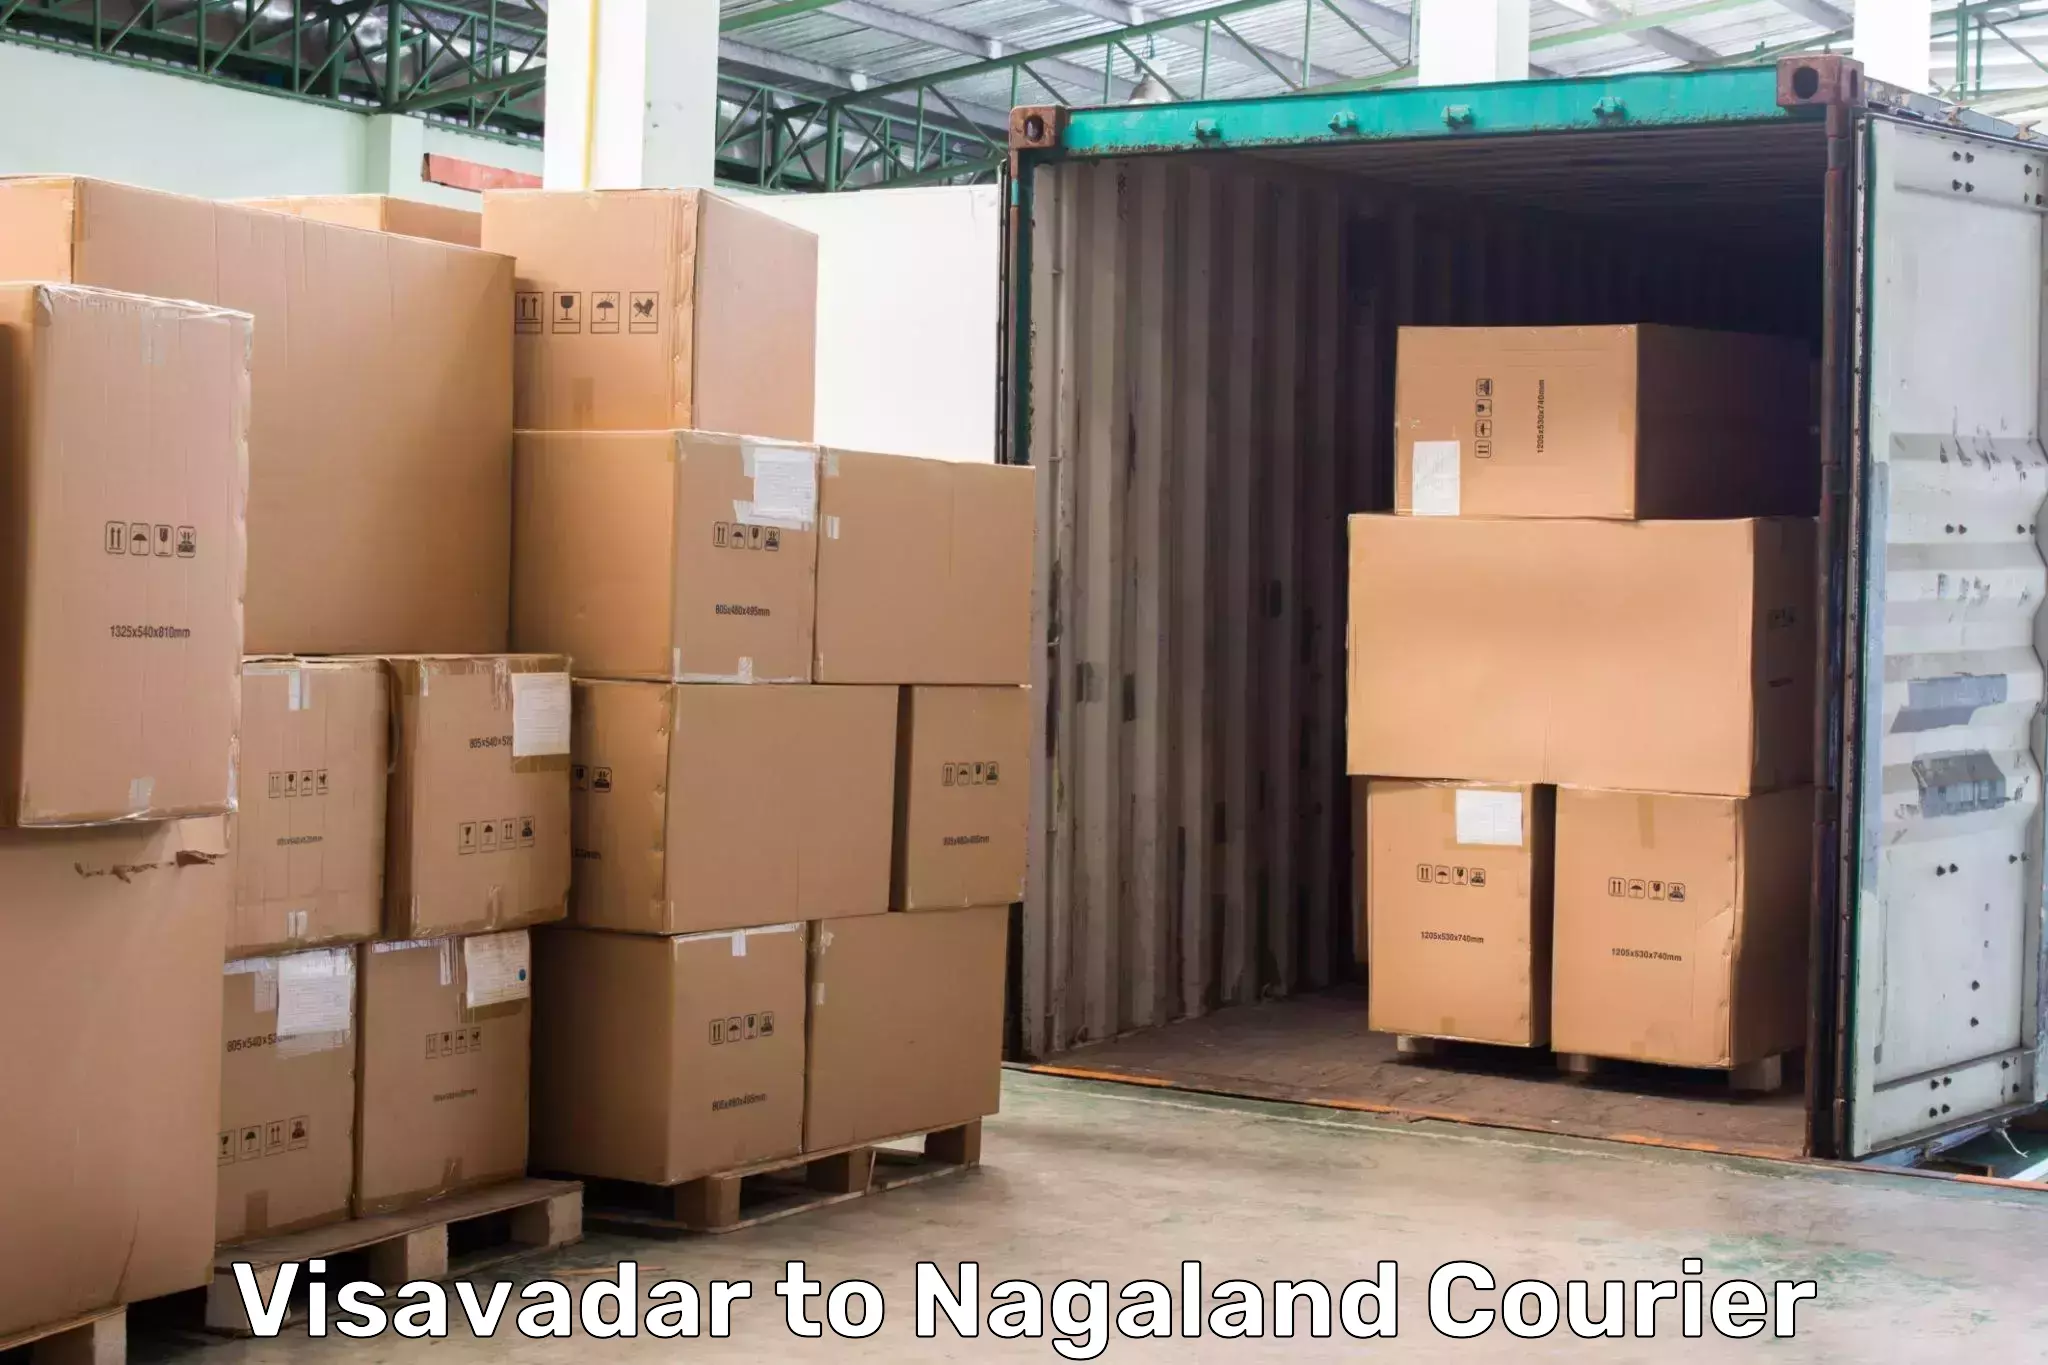 Express delivery capabilities in Visavadar to Nagaland